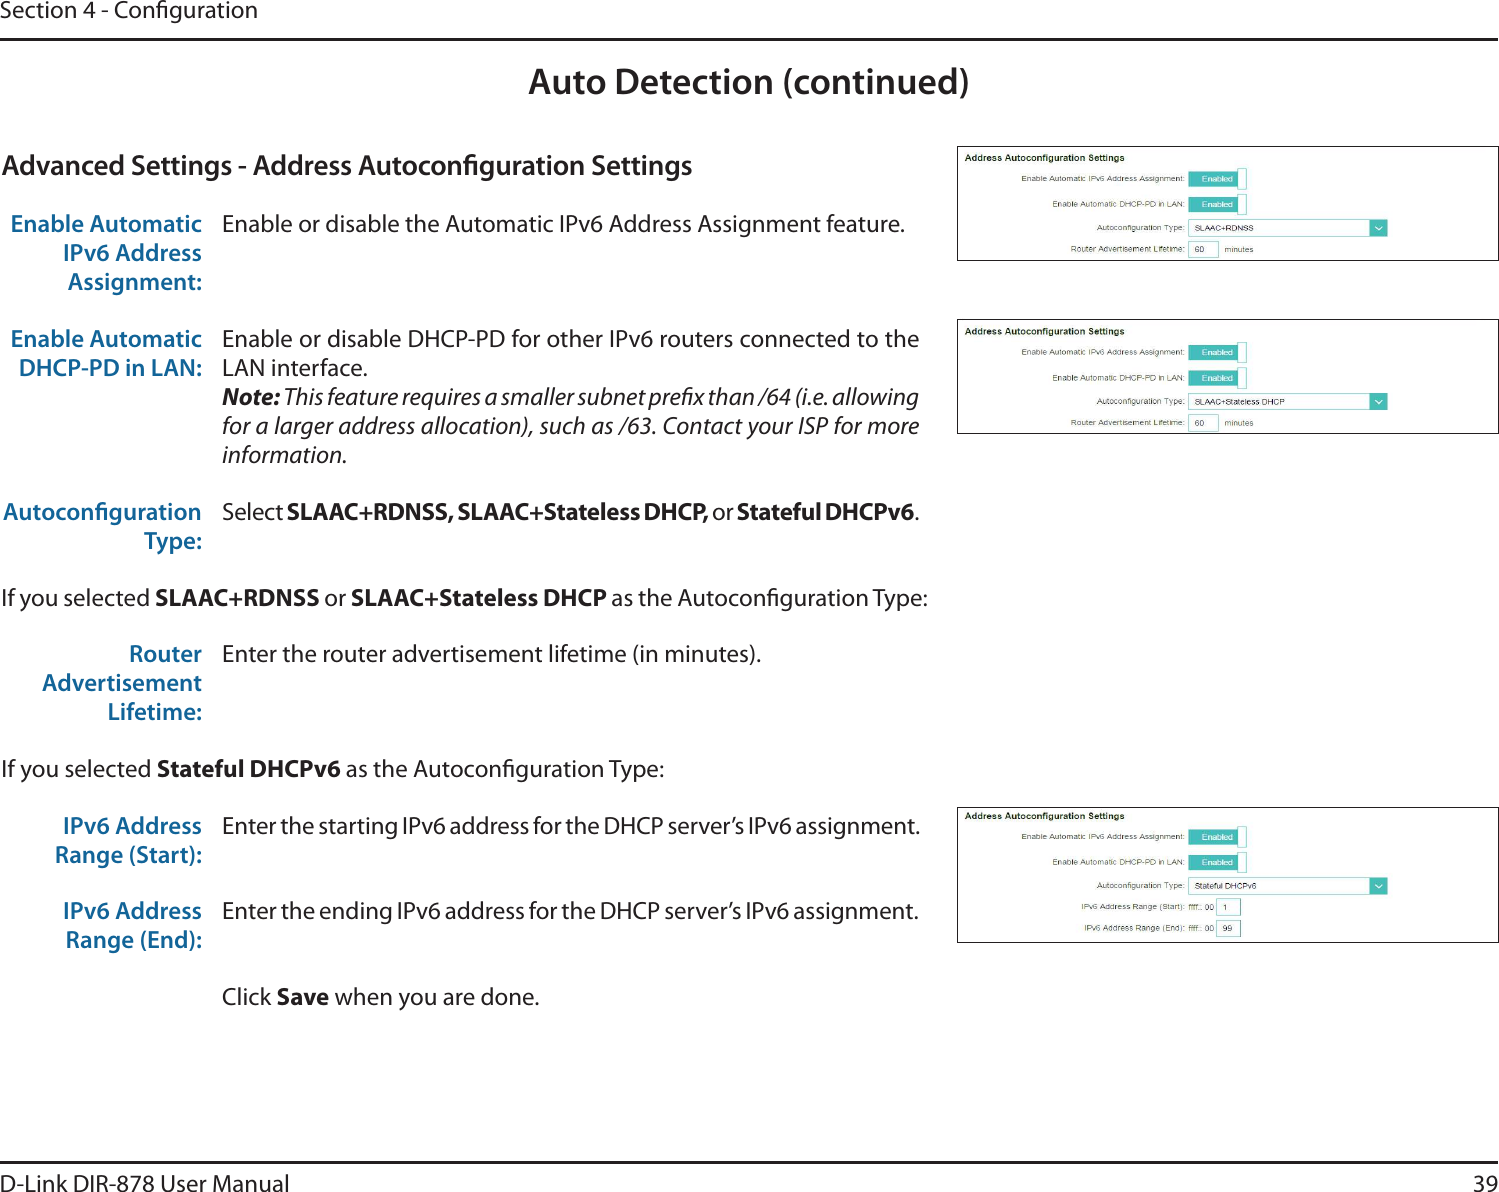 39D-Link DIR-878 User ManualSection 4 - CongurationAuto Detection (continued)Advanced Settings - Address Autoconguration SettingsEnable Automatic IPv6 Address Assignment:Enable or disable the Automatic IPv6 Address Assignment feature.Enable Automatic DHCP-PD in LAN:Enable or disable DHCP-PD for other IPv6 routers connected to the LAN interface.Note: This feature requires a smaller subnet prex than /64 (i.e. allowing for a larger address allocation), such as /63. Contact your ISP for more information.Autoconguration Type:Select 4-&quot;&quot;$3%/444-&quot;&quot;$4UBUFMFTT%)$1or Stateful DHCPv6.If you selected 4-&quot;&quot;$3%/44 or4-&quot;&quot;$4UBUFMFTT%)$1as the Autoconguration Type:Router Advertisement Lifetime:Enter the router advertisement lifetime (in minutes).If you selected Stateful DHCPv6 as the Autoconguration Type:IPv6 Address Range (Start):Enter the starting IPv6 address for the DHCP server’s IPv6 assignment.IPv6 Address Range (End):Enter the ending IPv6 address for the DHCP server’s IPv6 assignment.Click Save when you are done.